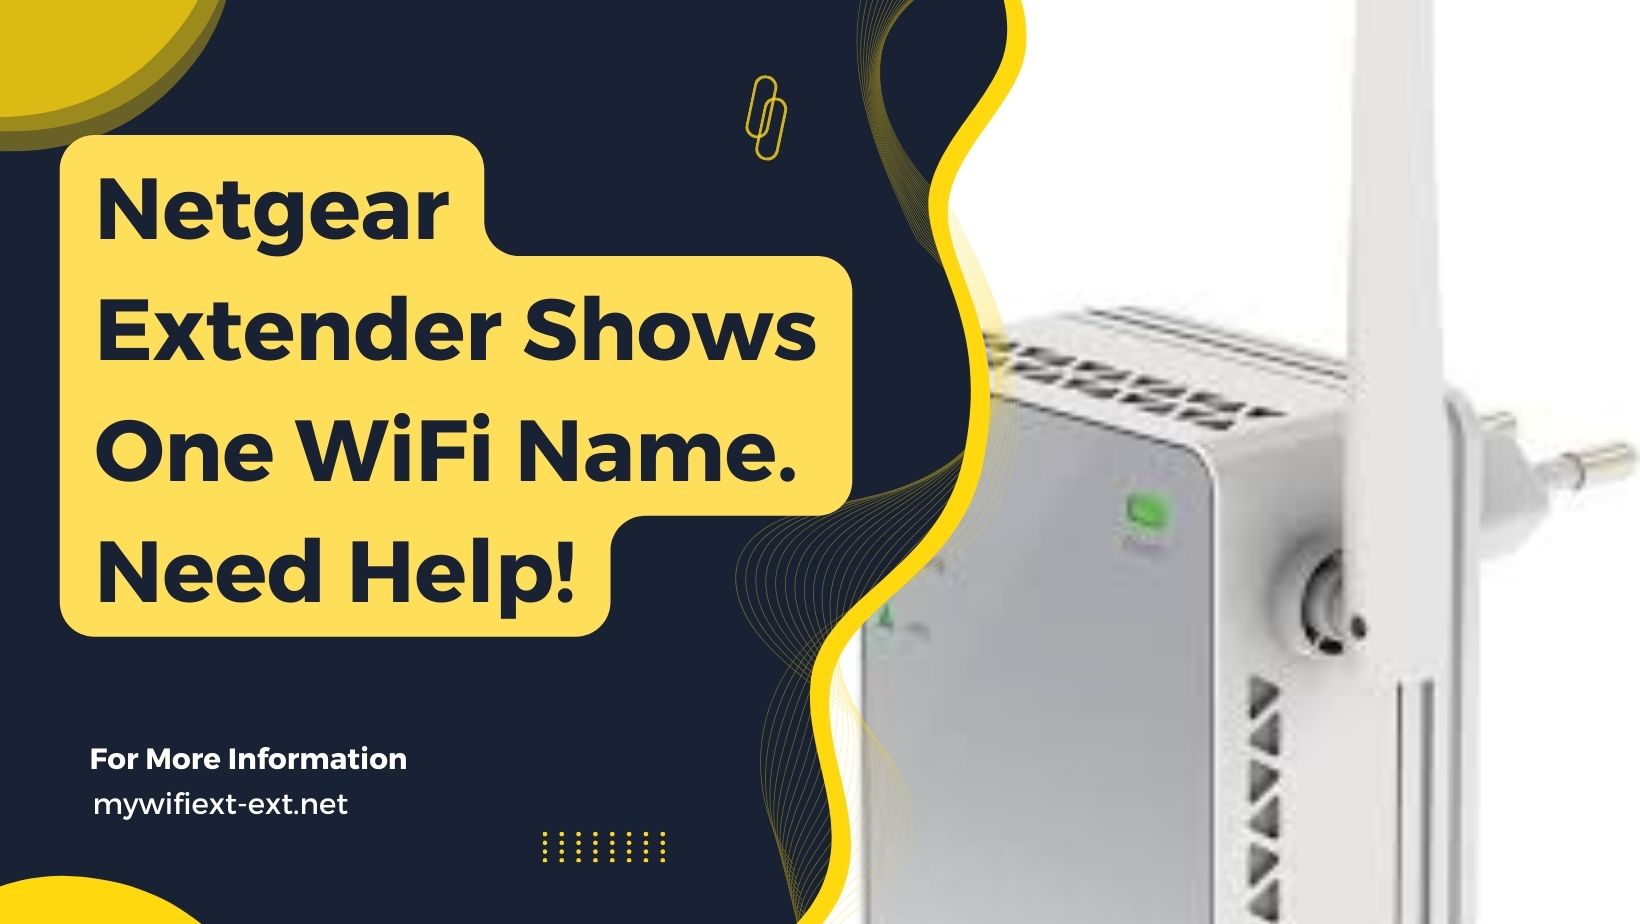 You are currently viewing Netgear Extender Shows One WiFi Name. Need Help!